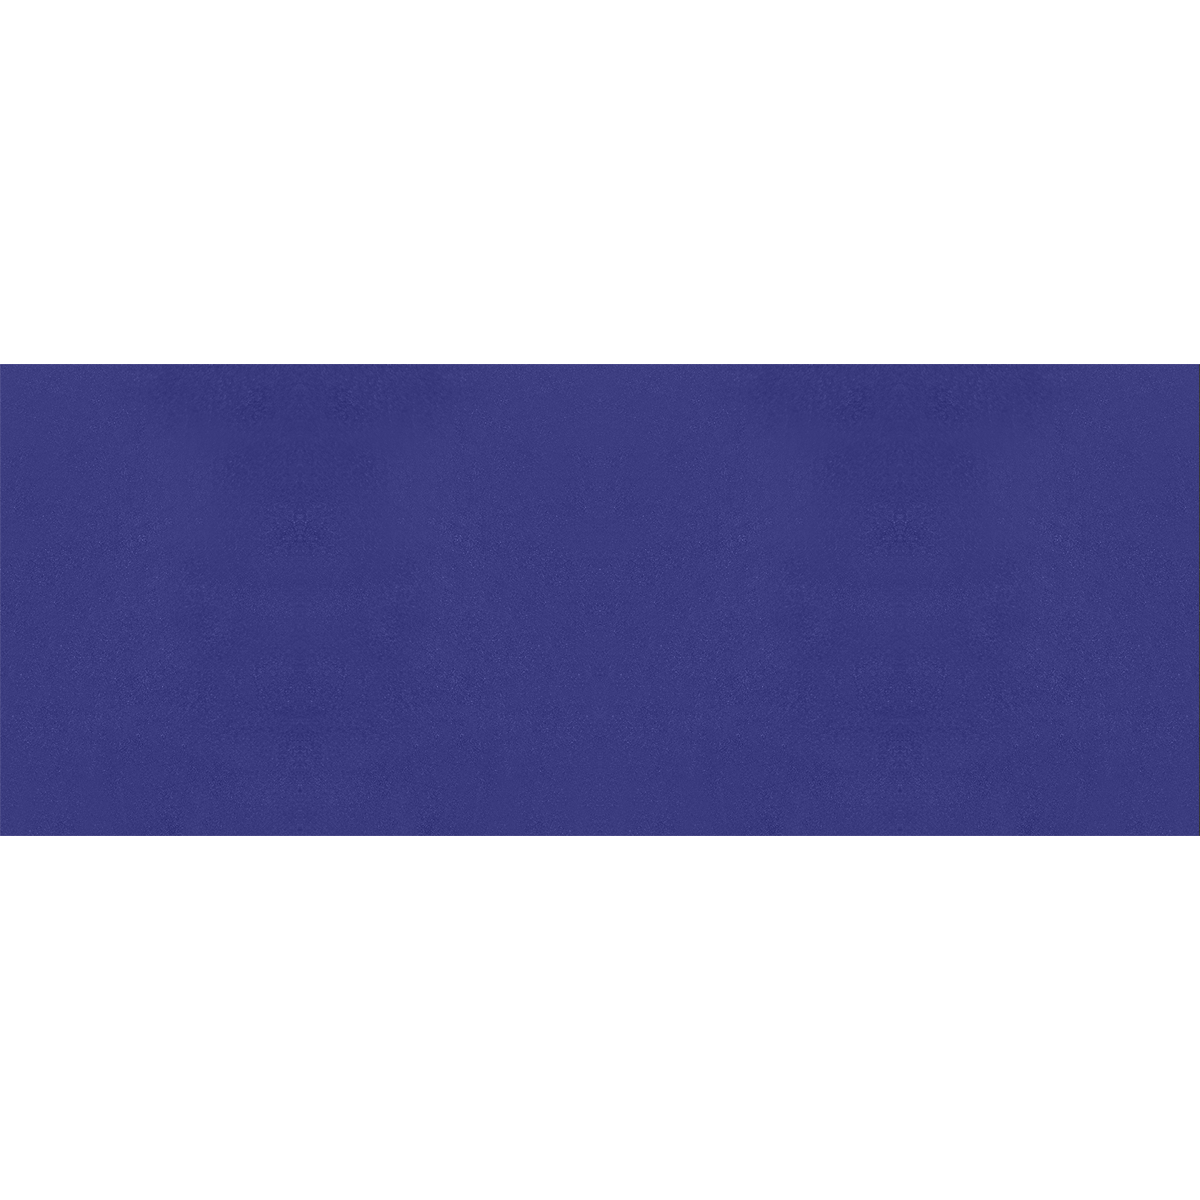 color midnight blue Gift Wrapping Paper 58"x 23" (1 Roll)